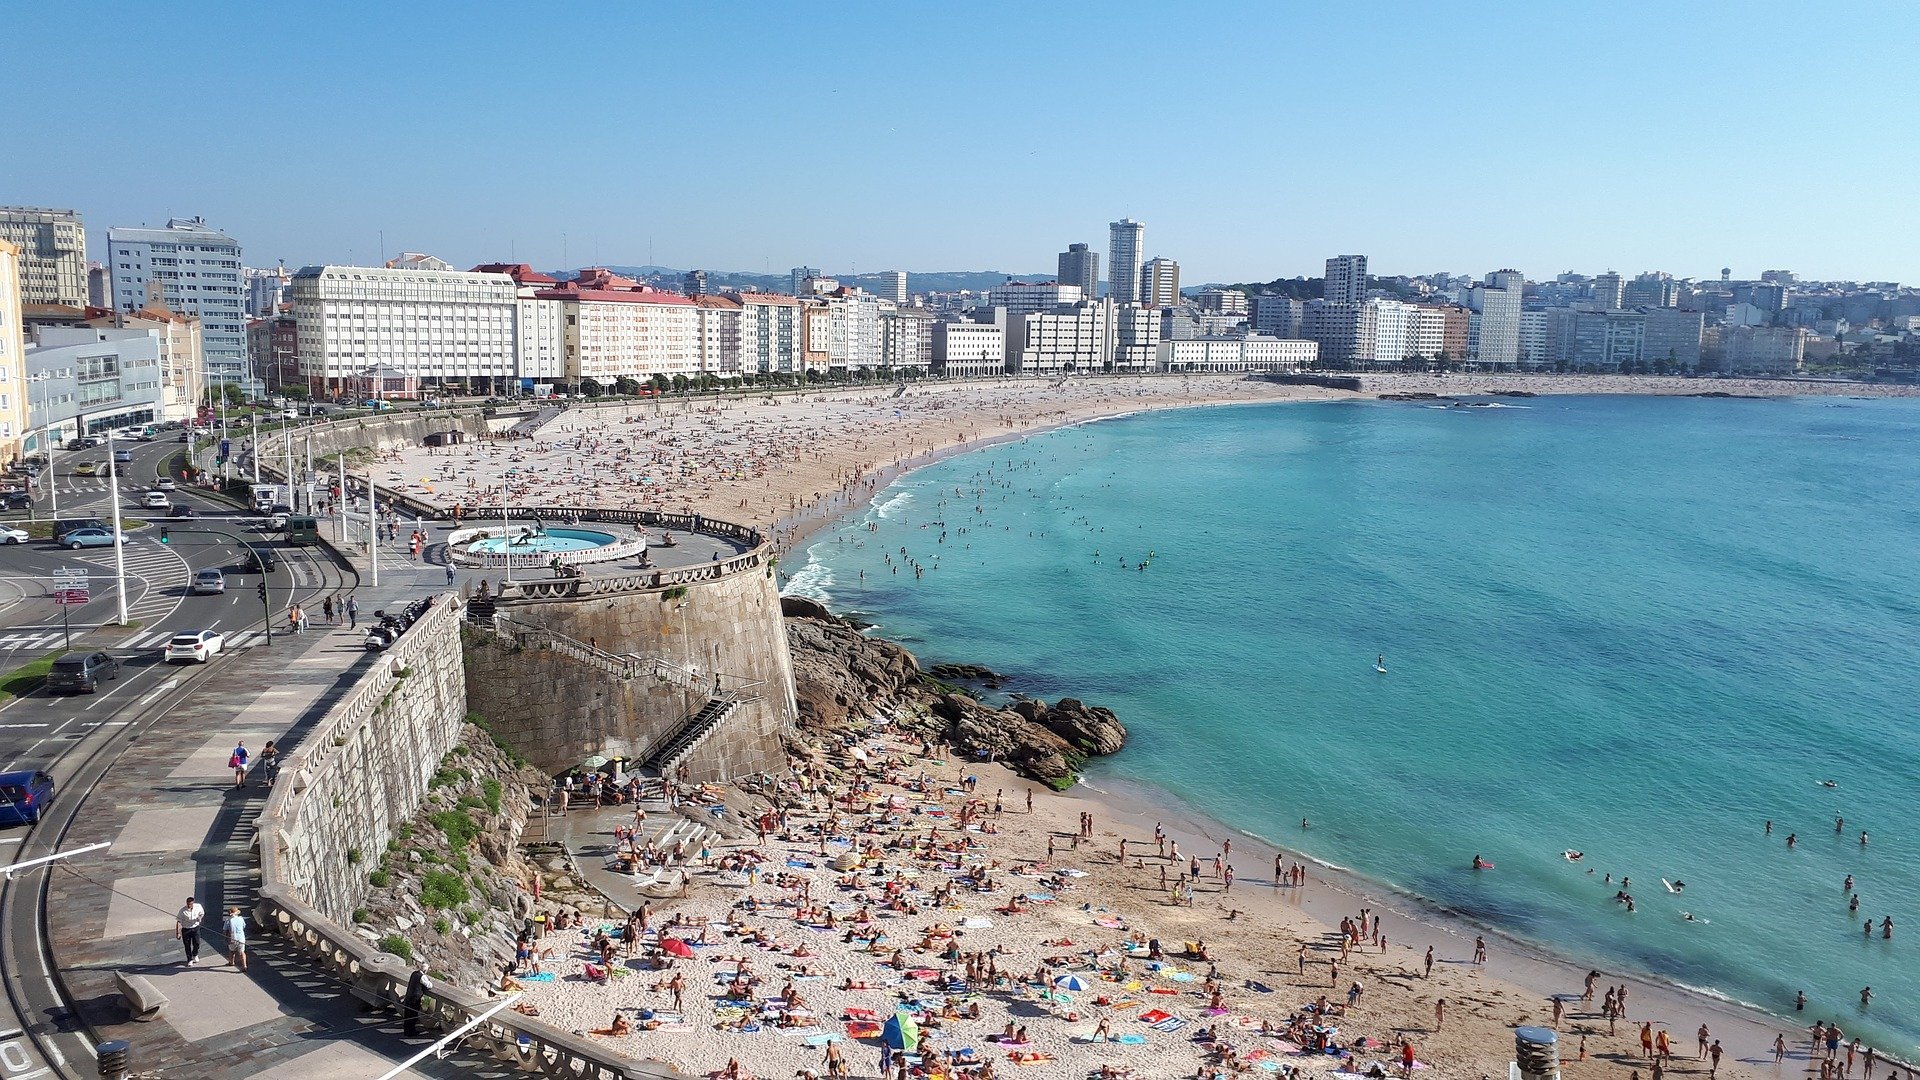 How To Get From A Coruña Airport To City Center - All Possible Ways